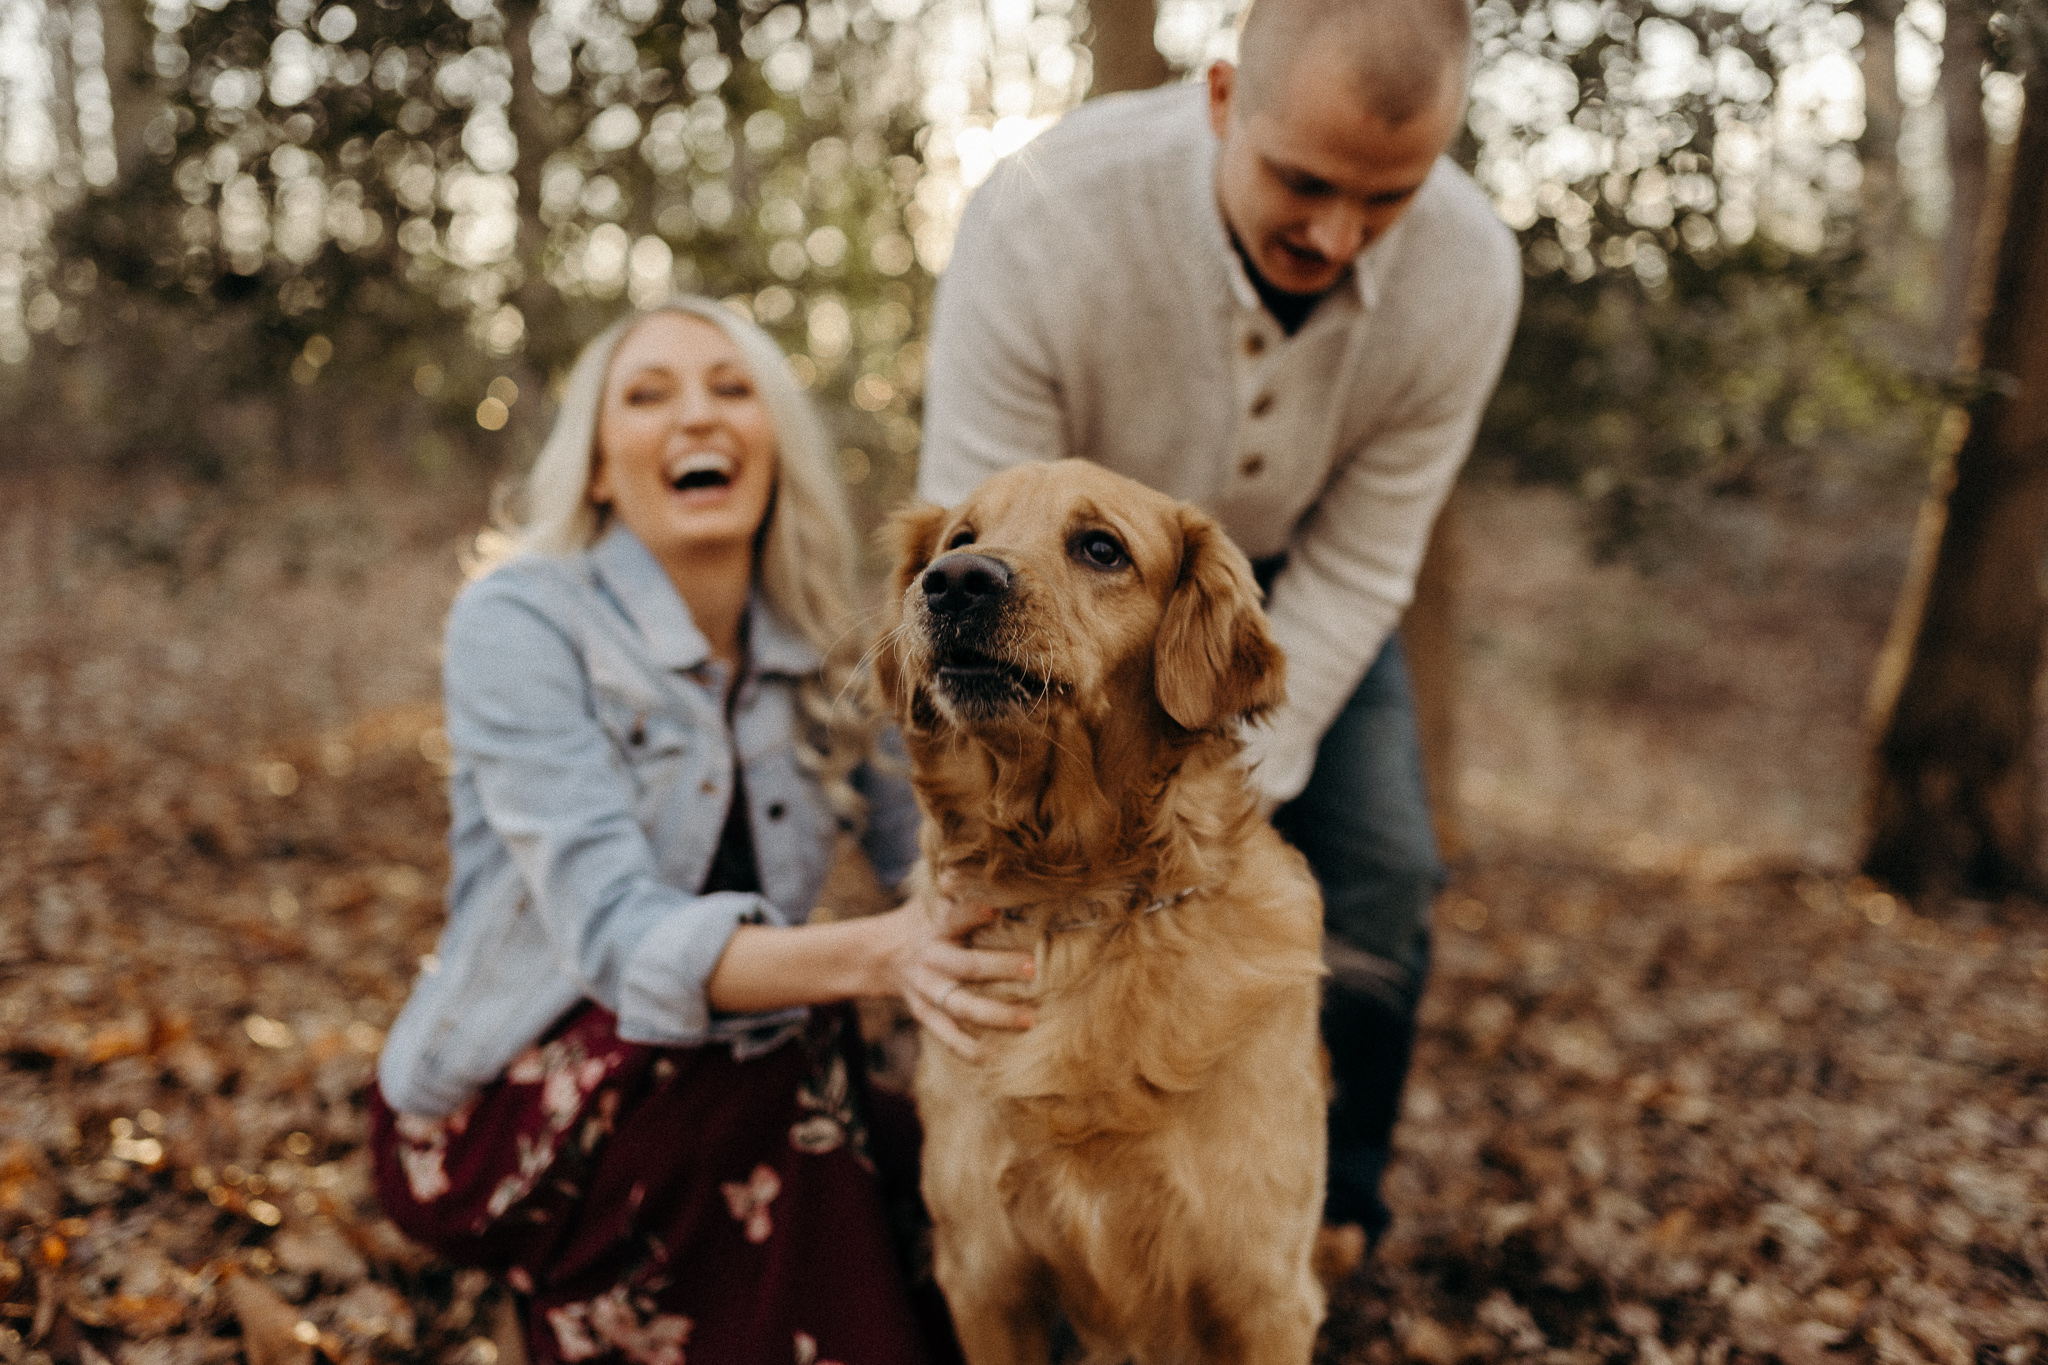 Fun & energetic quiet waters park engagement with their hilarious golden retriever // maryland wedding photographer